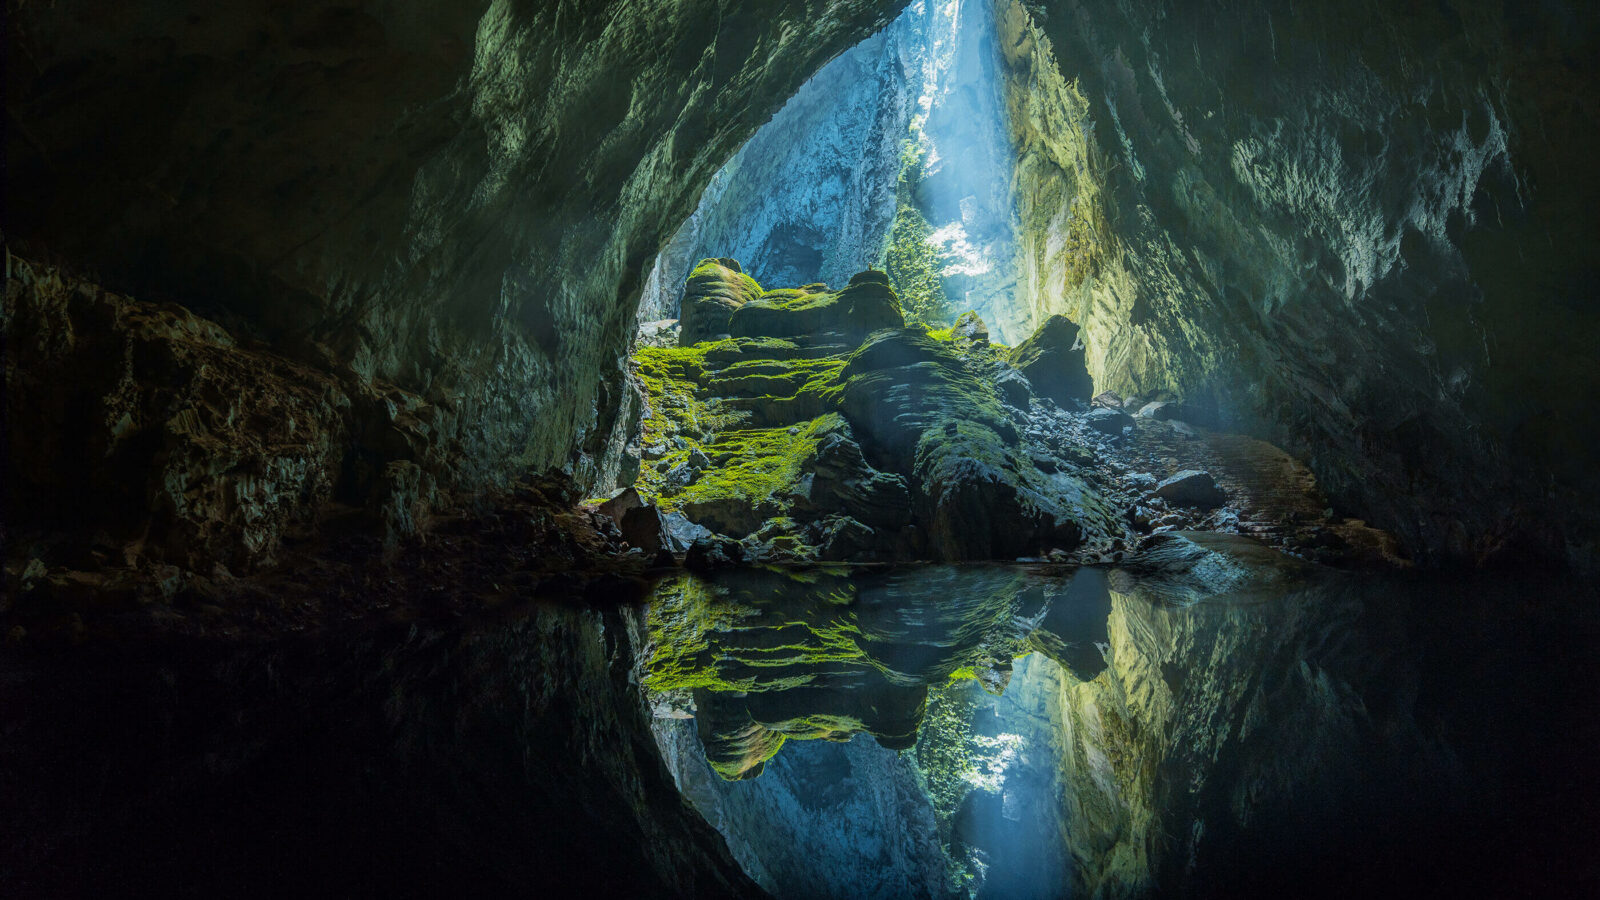 A large cave opening with water inside.